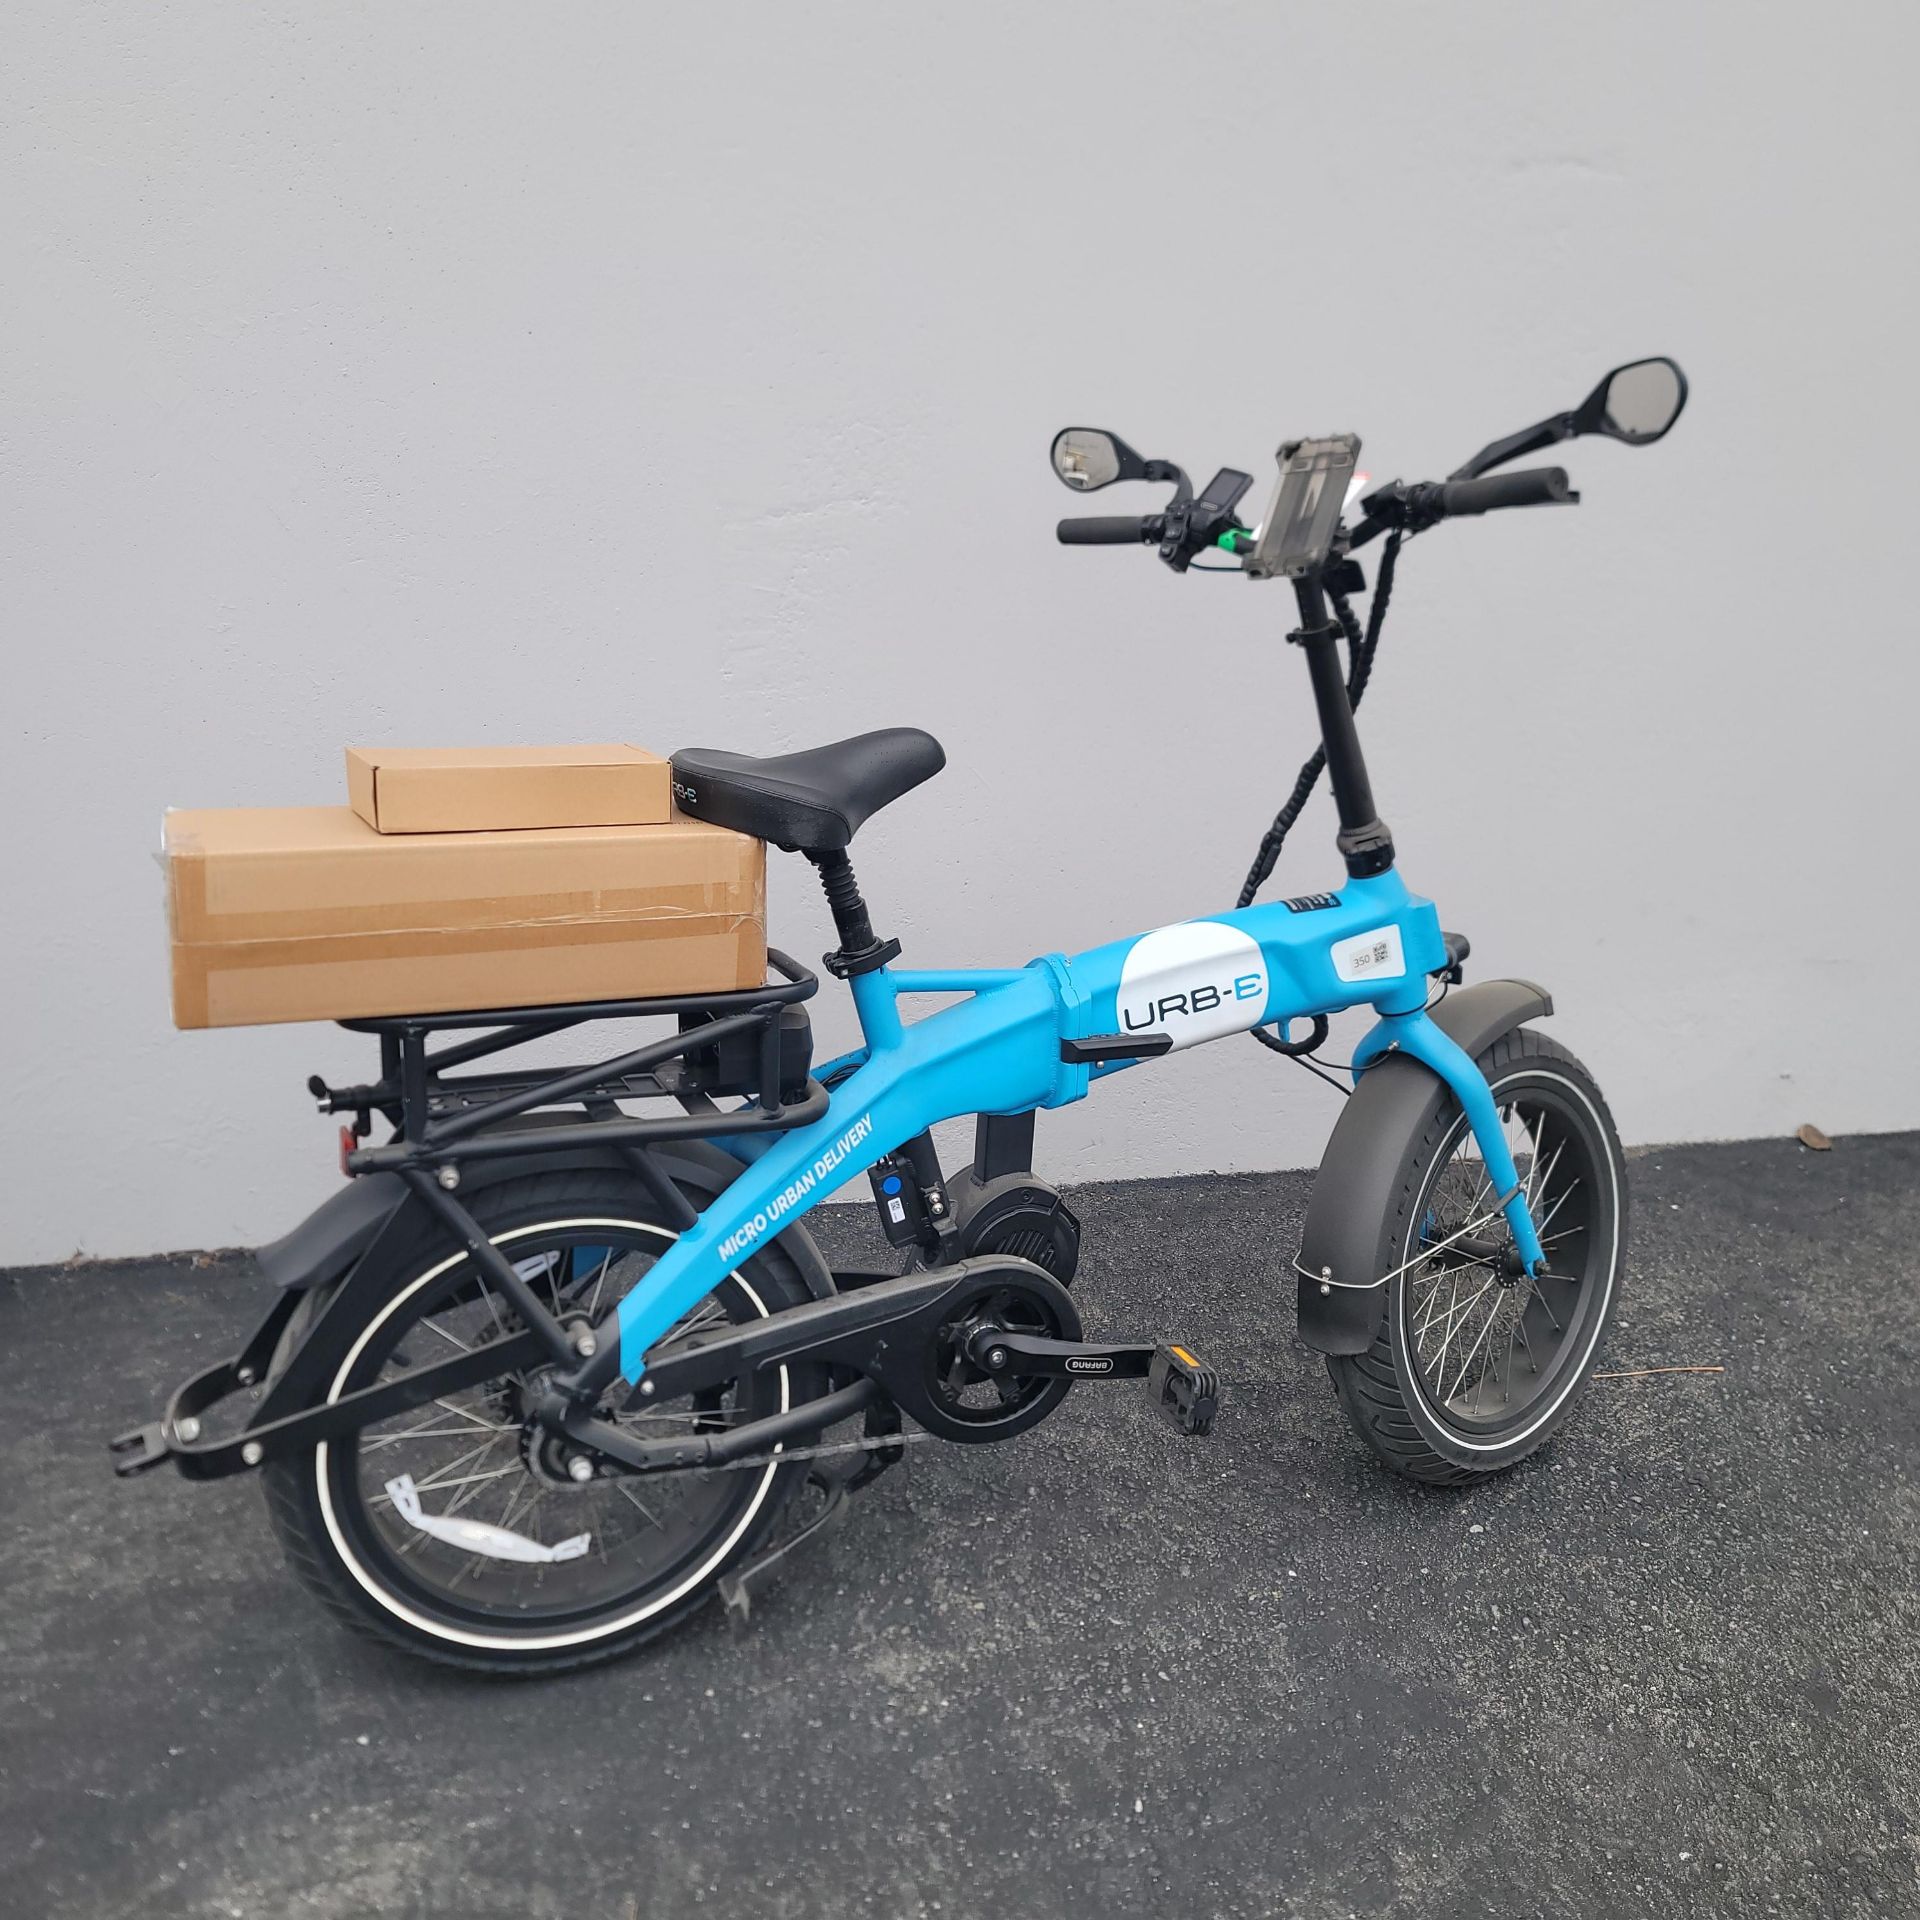 URB-E ELECTRIC DELIVERY BIKE, NEW, 750W MID DRIVE MOTOR, SINGLE SPEED, THUMB THROTTLE WITH PEDAL - Bild 2 aus 6